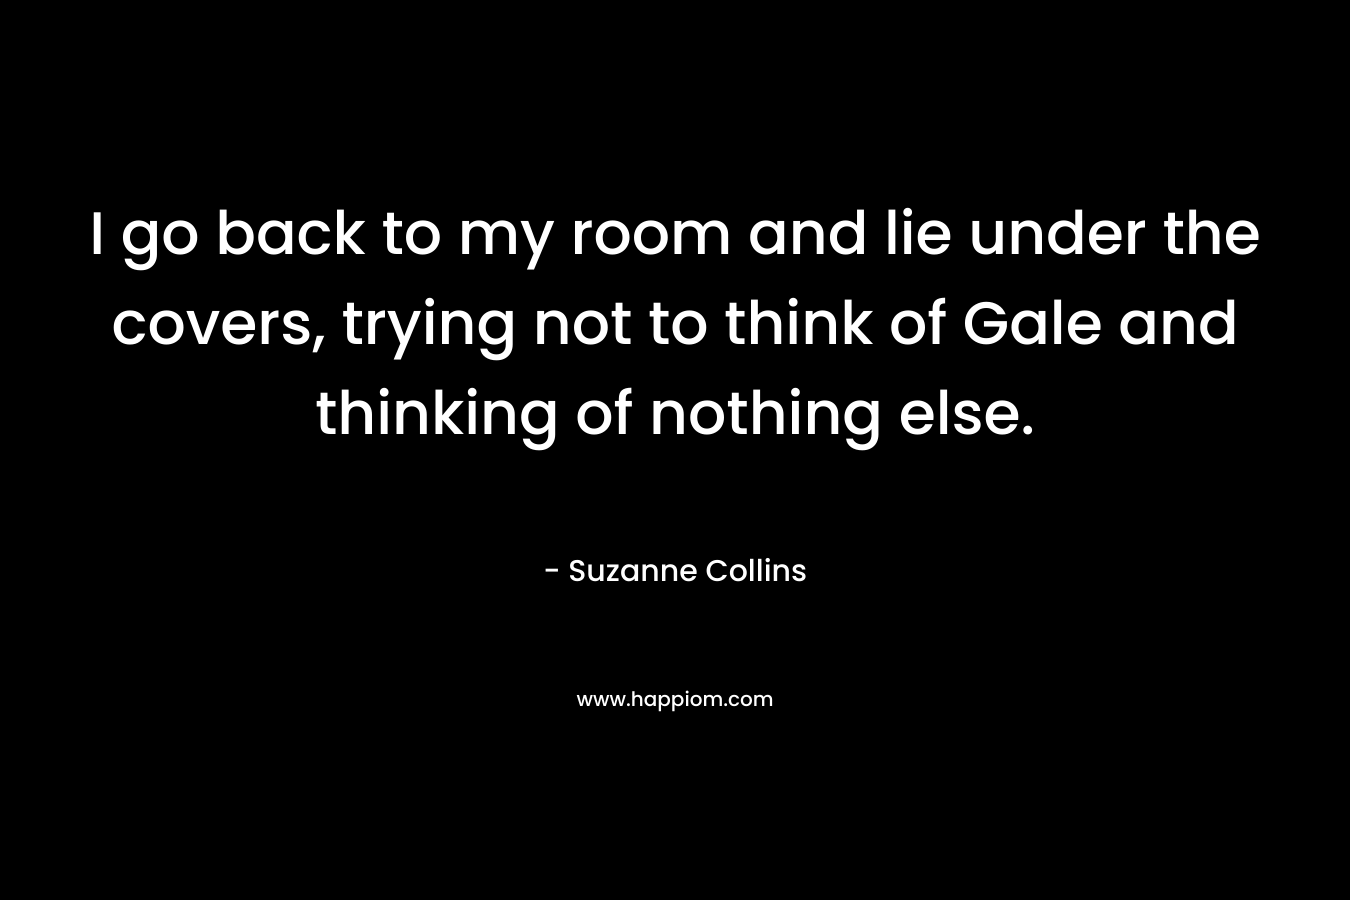 I go back to my room and lie under the covers, trying not to think of Gale and thinking of nothing else. – Suzanne Collins